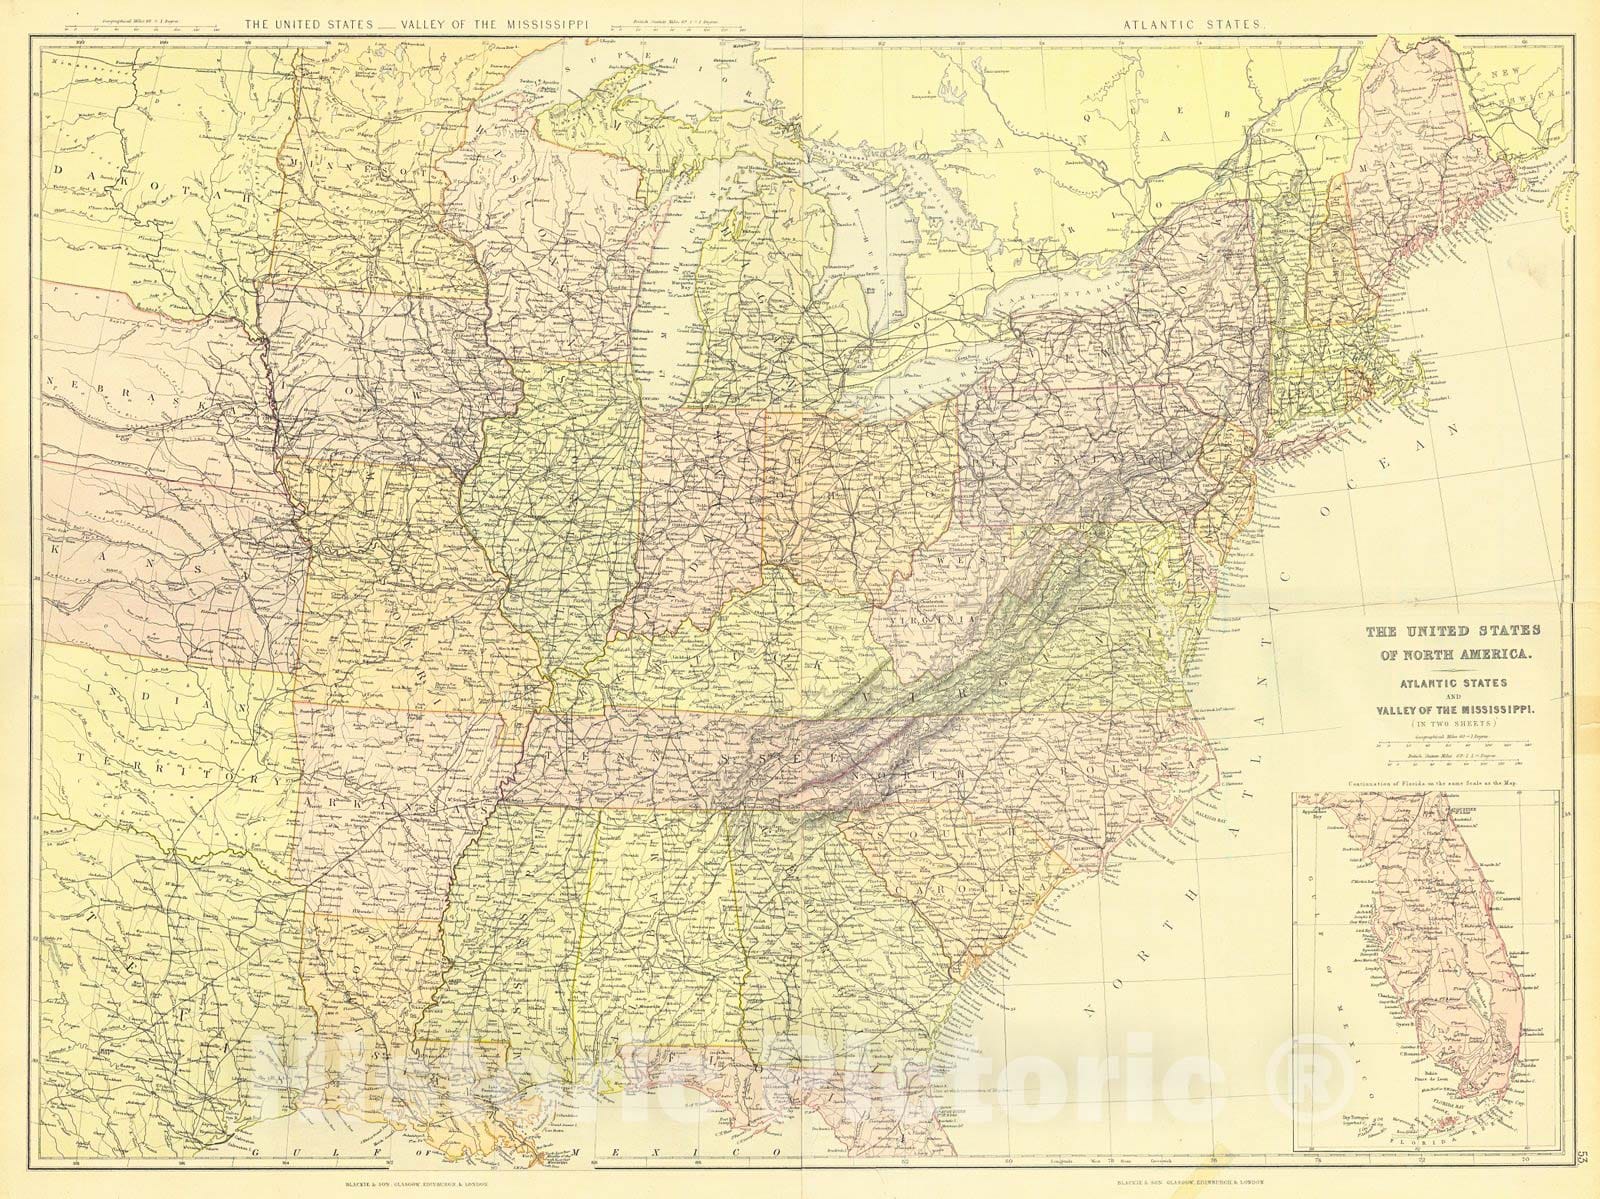 Historic Map : 1870 The United States of the North America. Atlantic States and Valley of the Mississippi : Vintage Wall Art